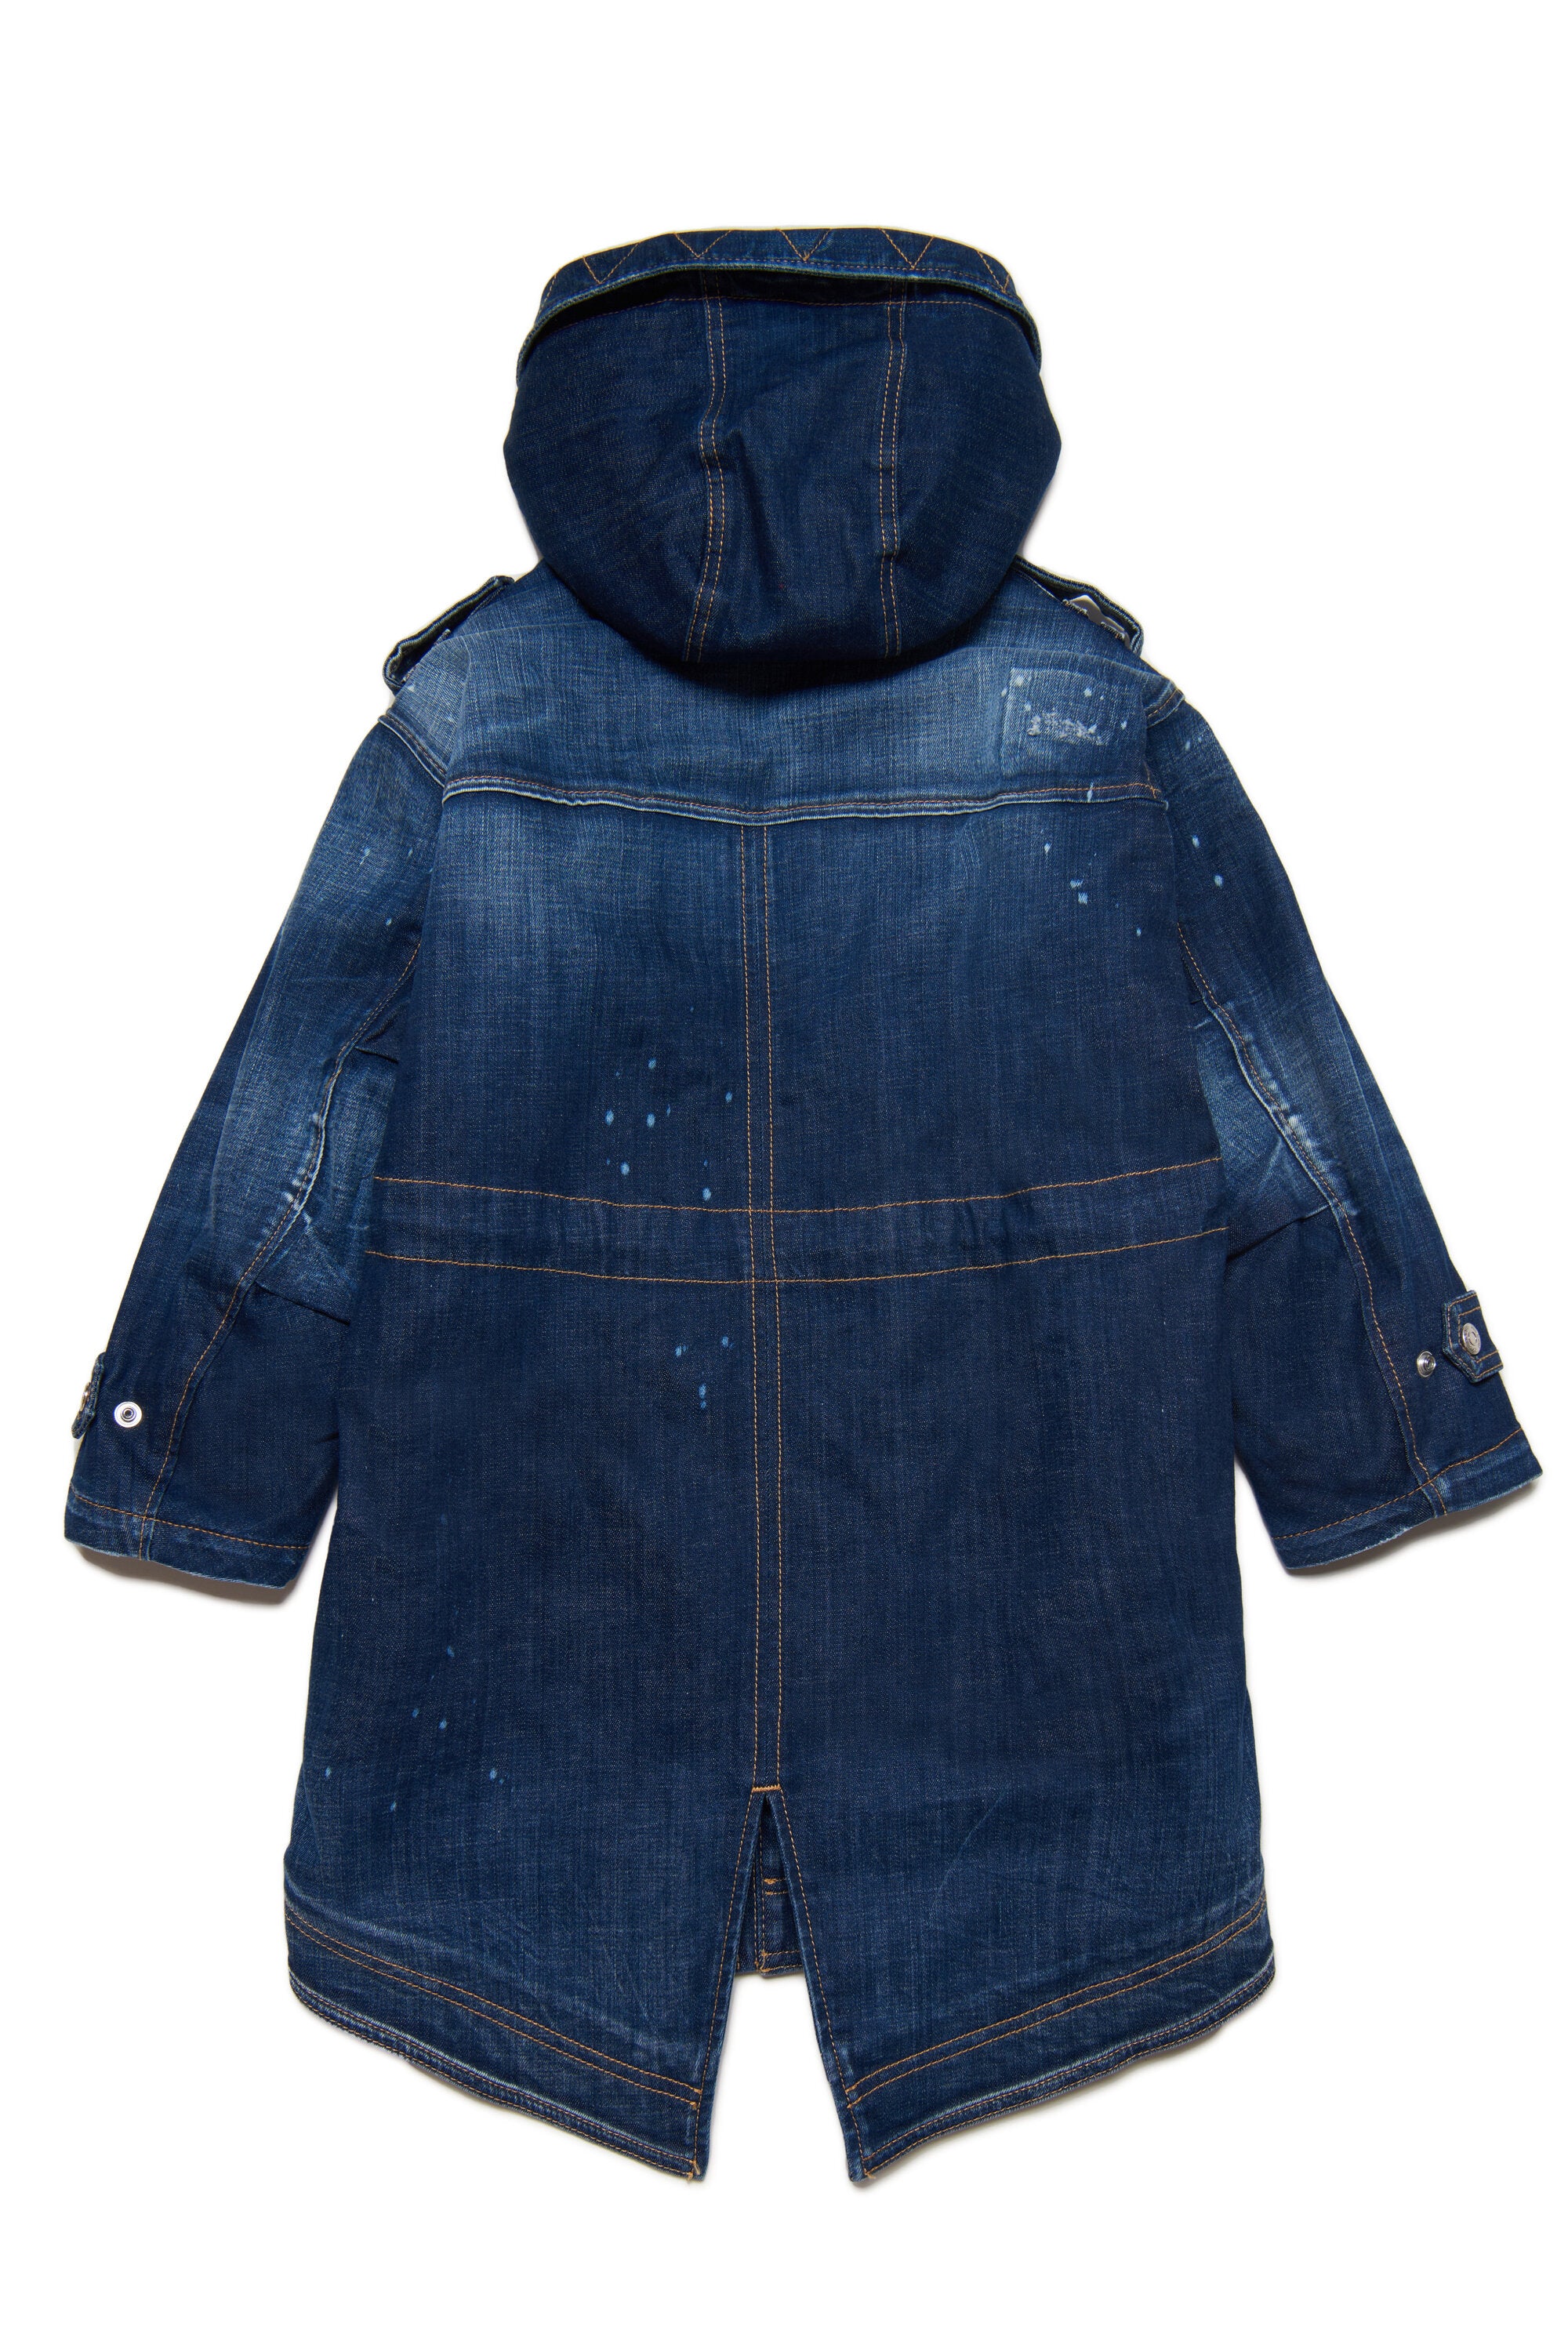 Shaded blue denim parka jacket with abrasions and stains